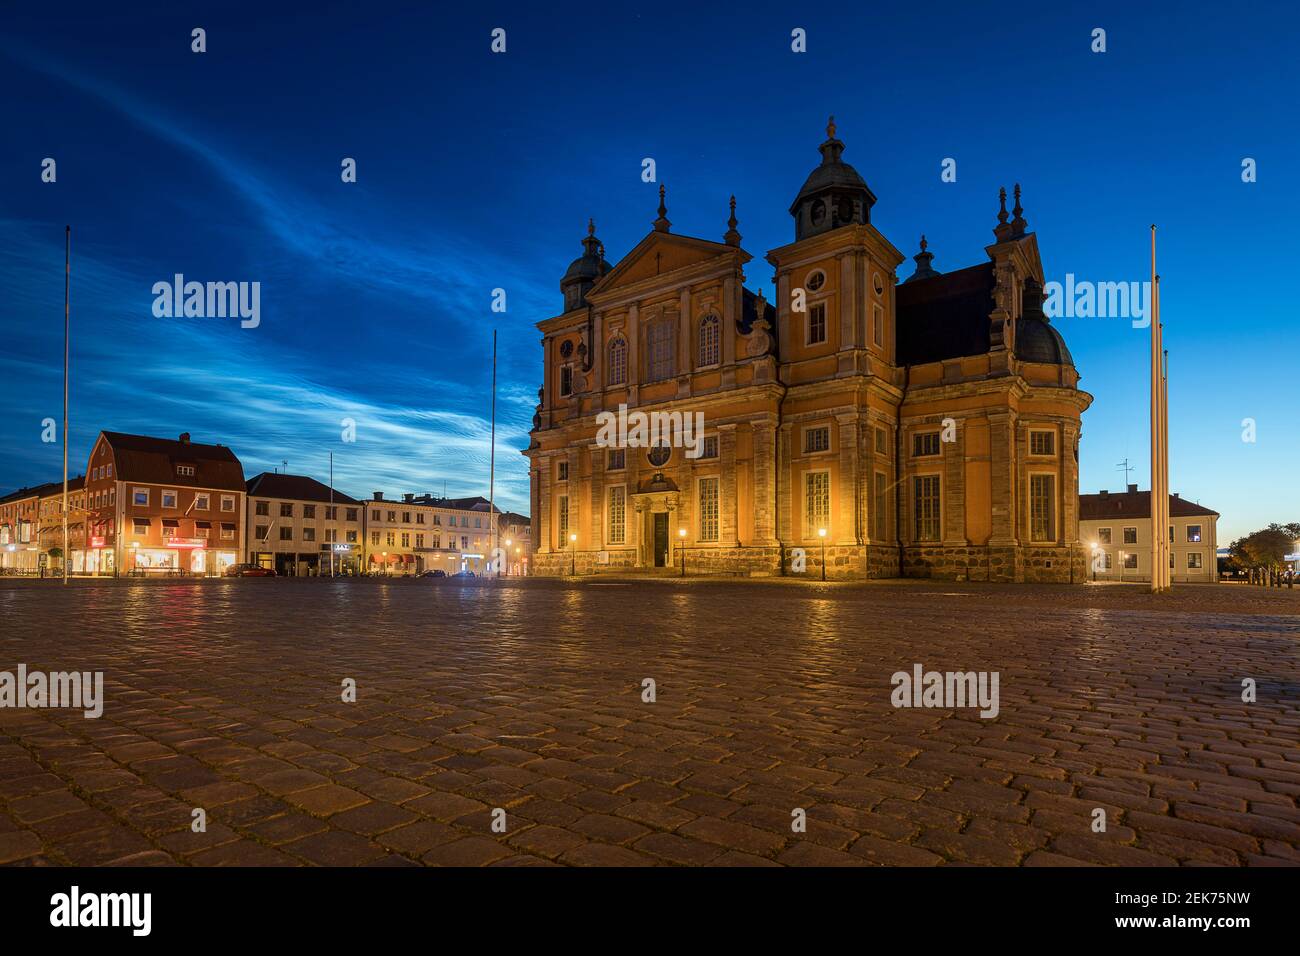 Kalmar cathedral in Sweden at night Stock Photo